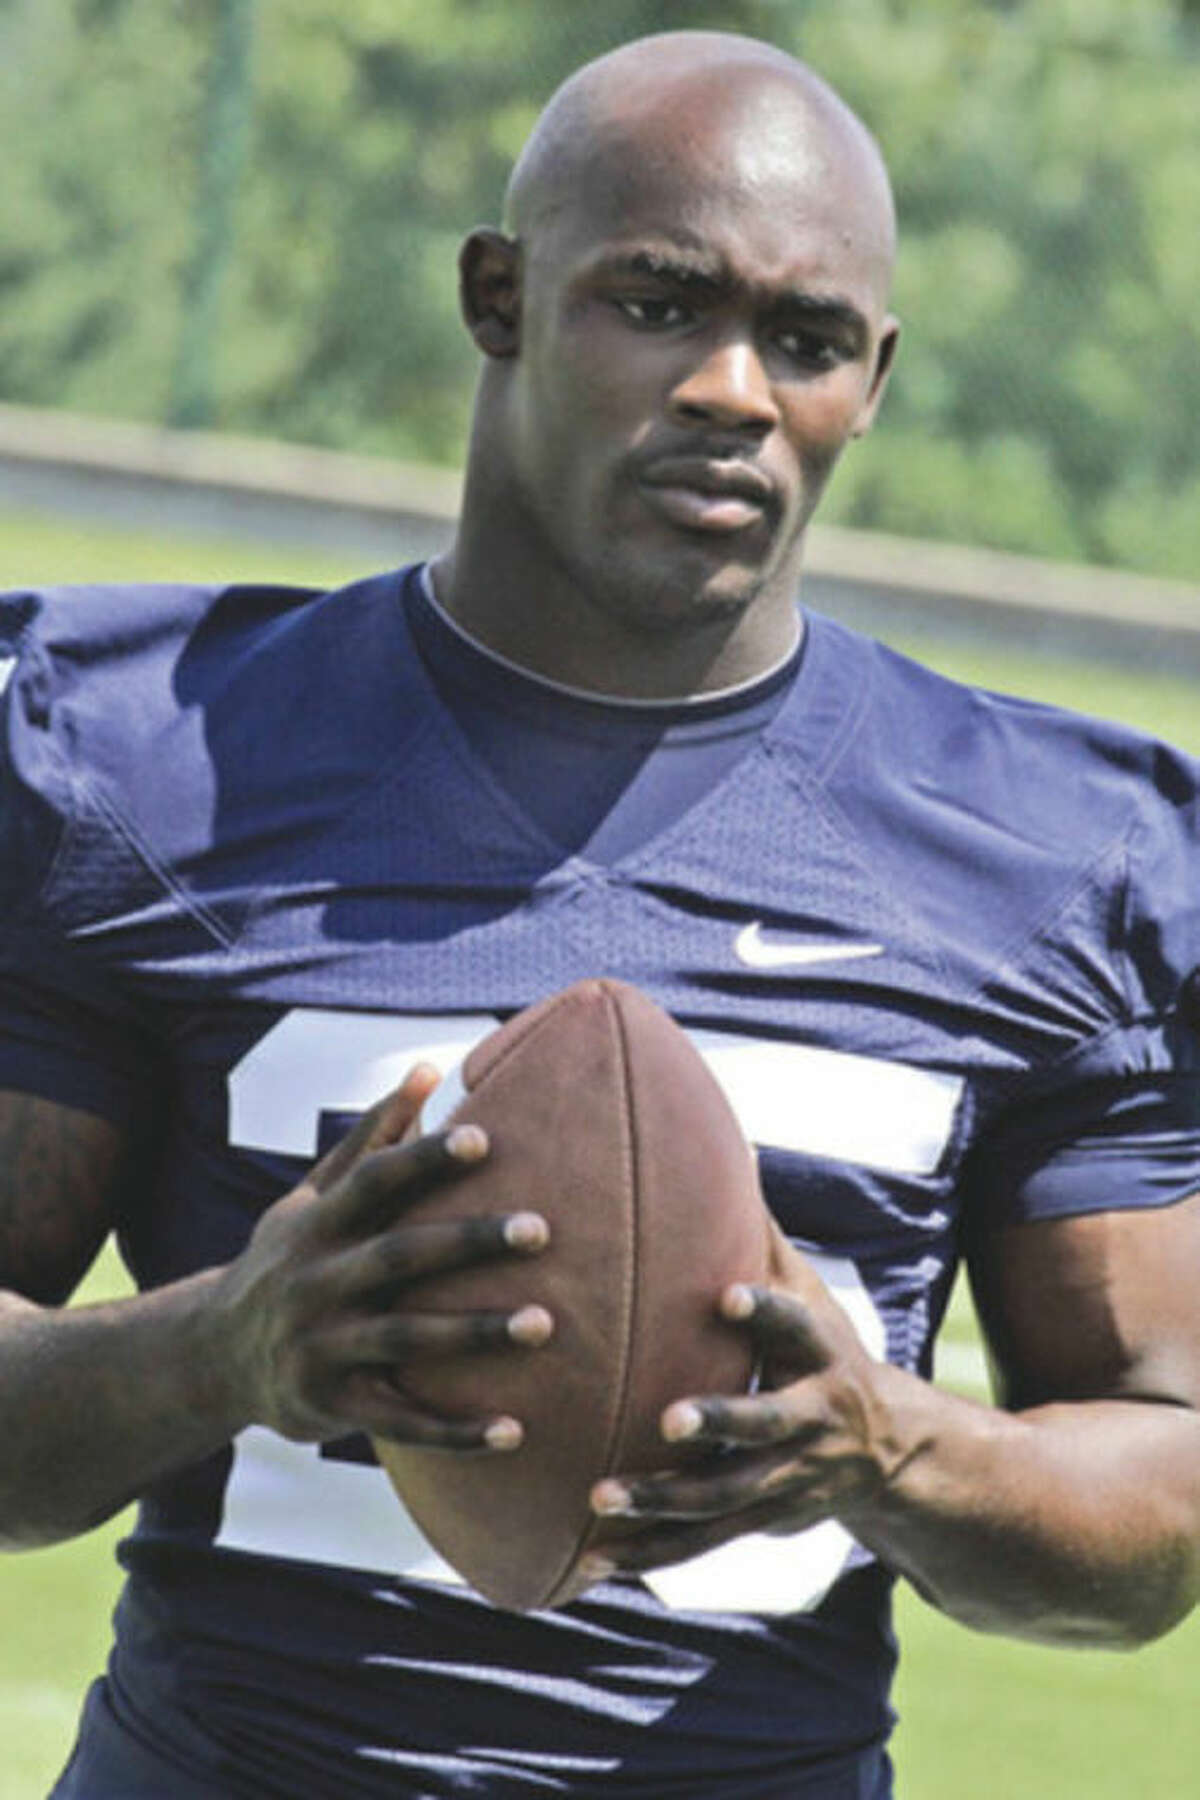 In this file photo taken Aug, 16, 2011, Penn State tailback Silas Redd takes part in the college football team's media day in State College, Pa., Tuesday, Aug. 16, 2011. Redd will be stepping in for the career school rushing leader Evan Royster this season as a sophomore. (AP Photo/Gene J. Puskar, File)